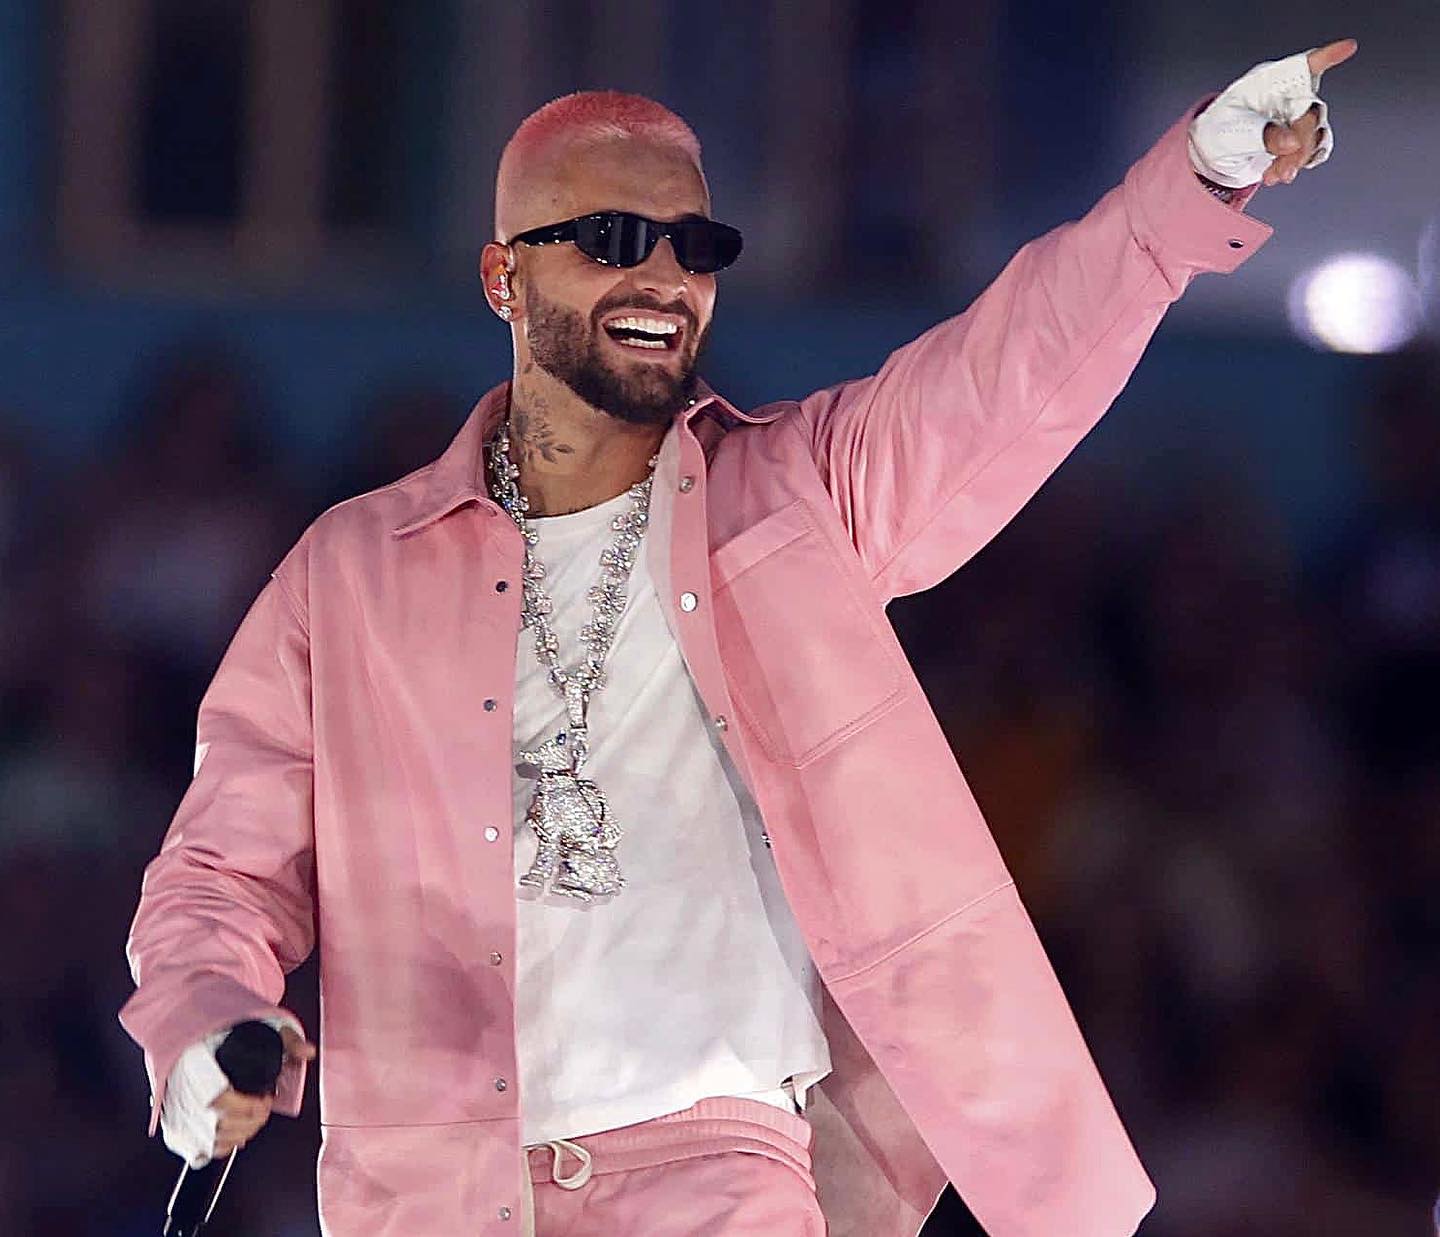 SPOTTED: Maluma dons Due Diligence set for Colombia Performance